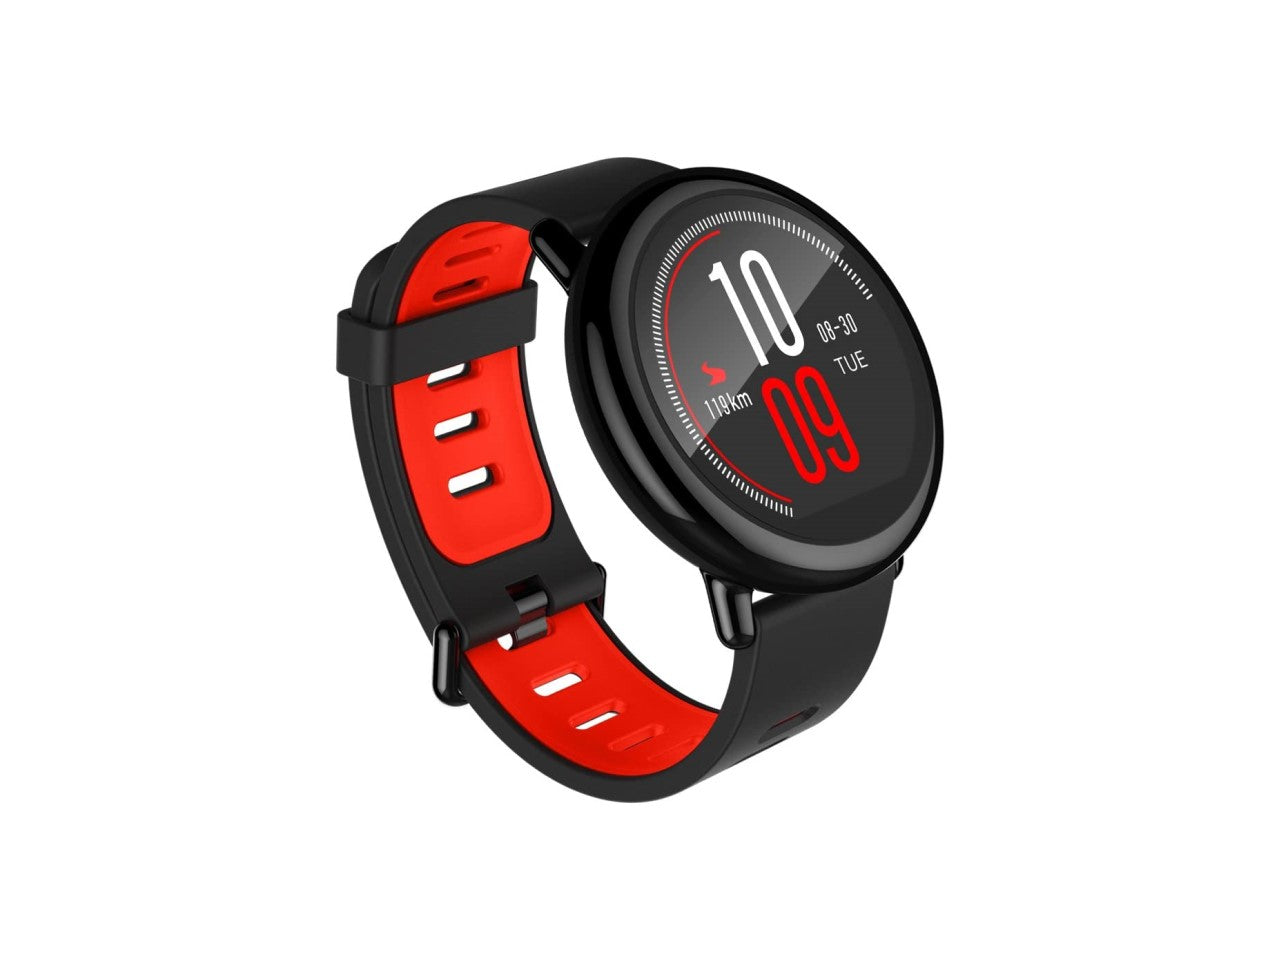 pace smartwatch